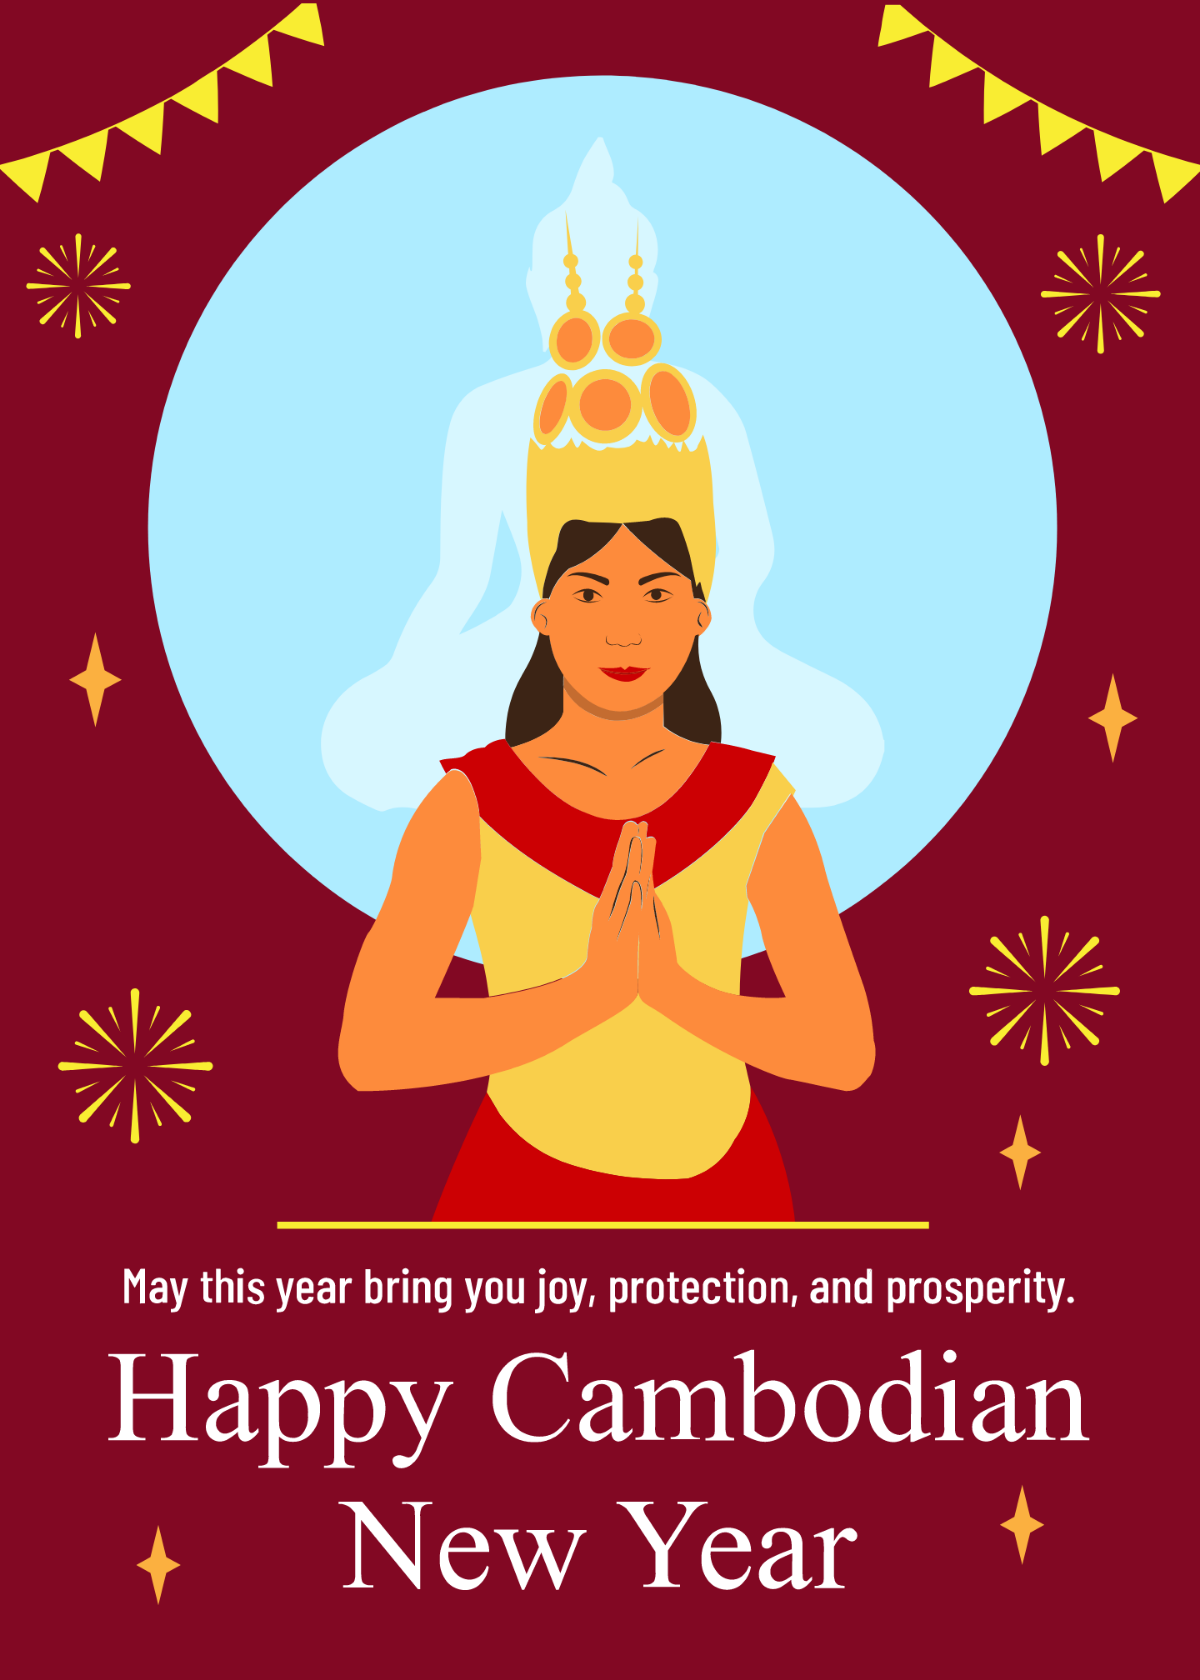 Khmer New Year Wishes Template